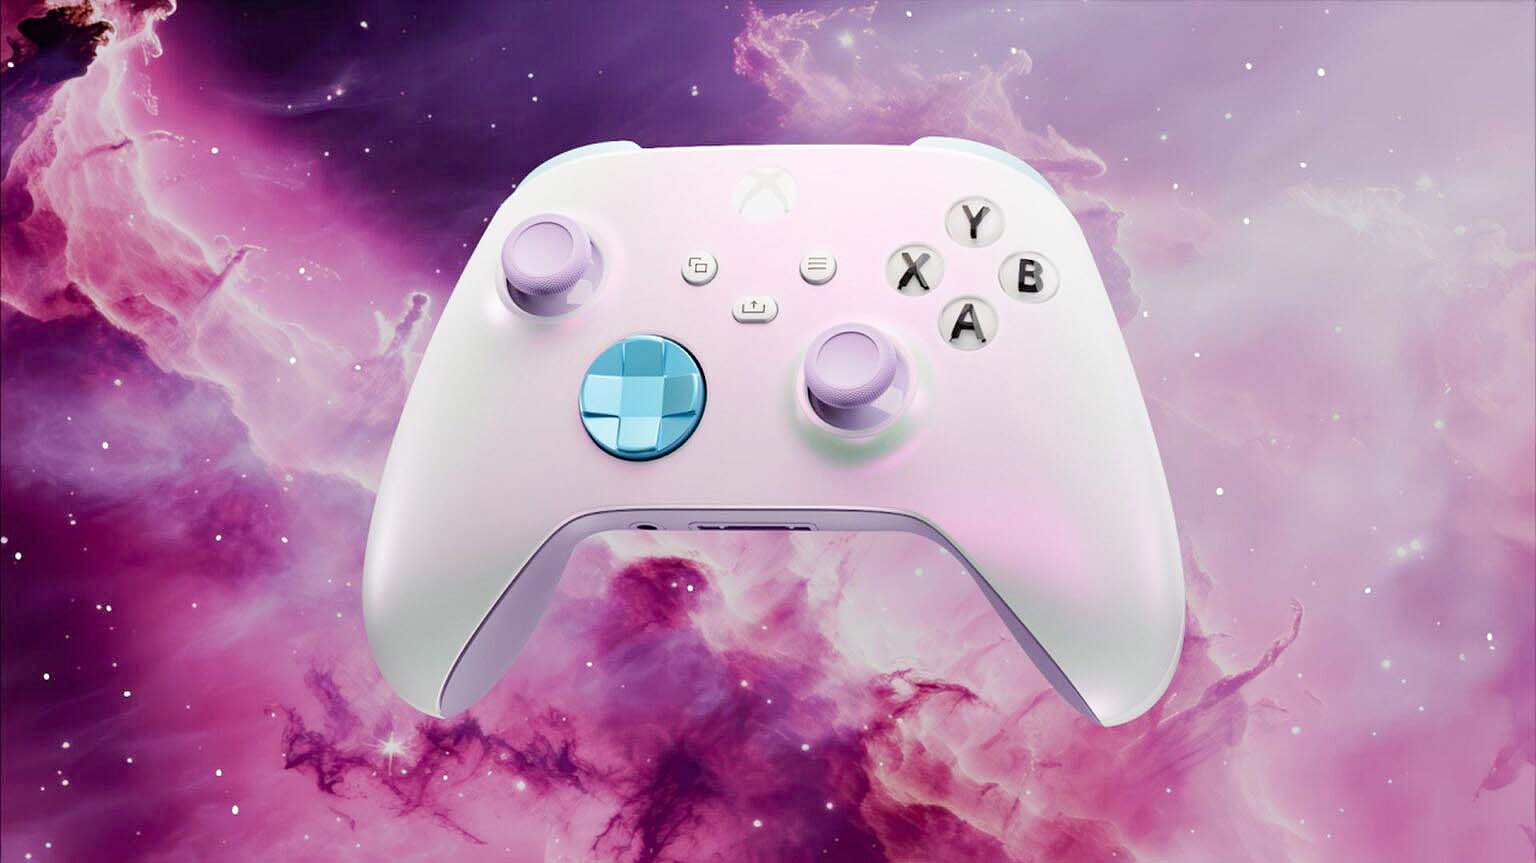 Xbox and OPI Channel the Hottest Summertime Hues to Create an Exclusive New  Controller - Xbox Wire